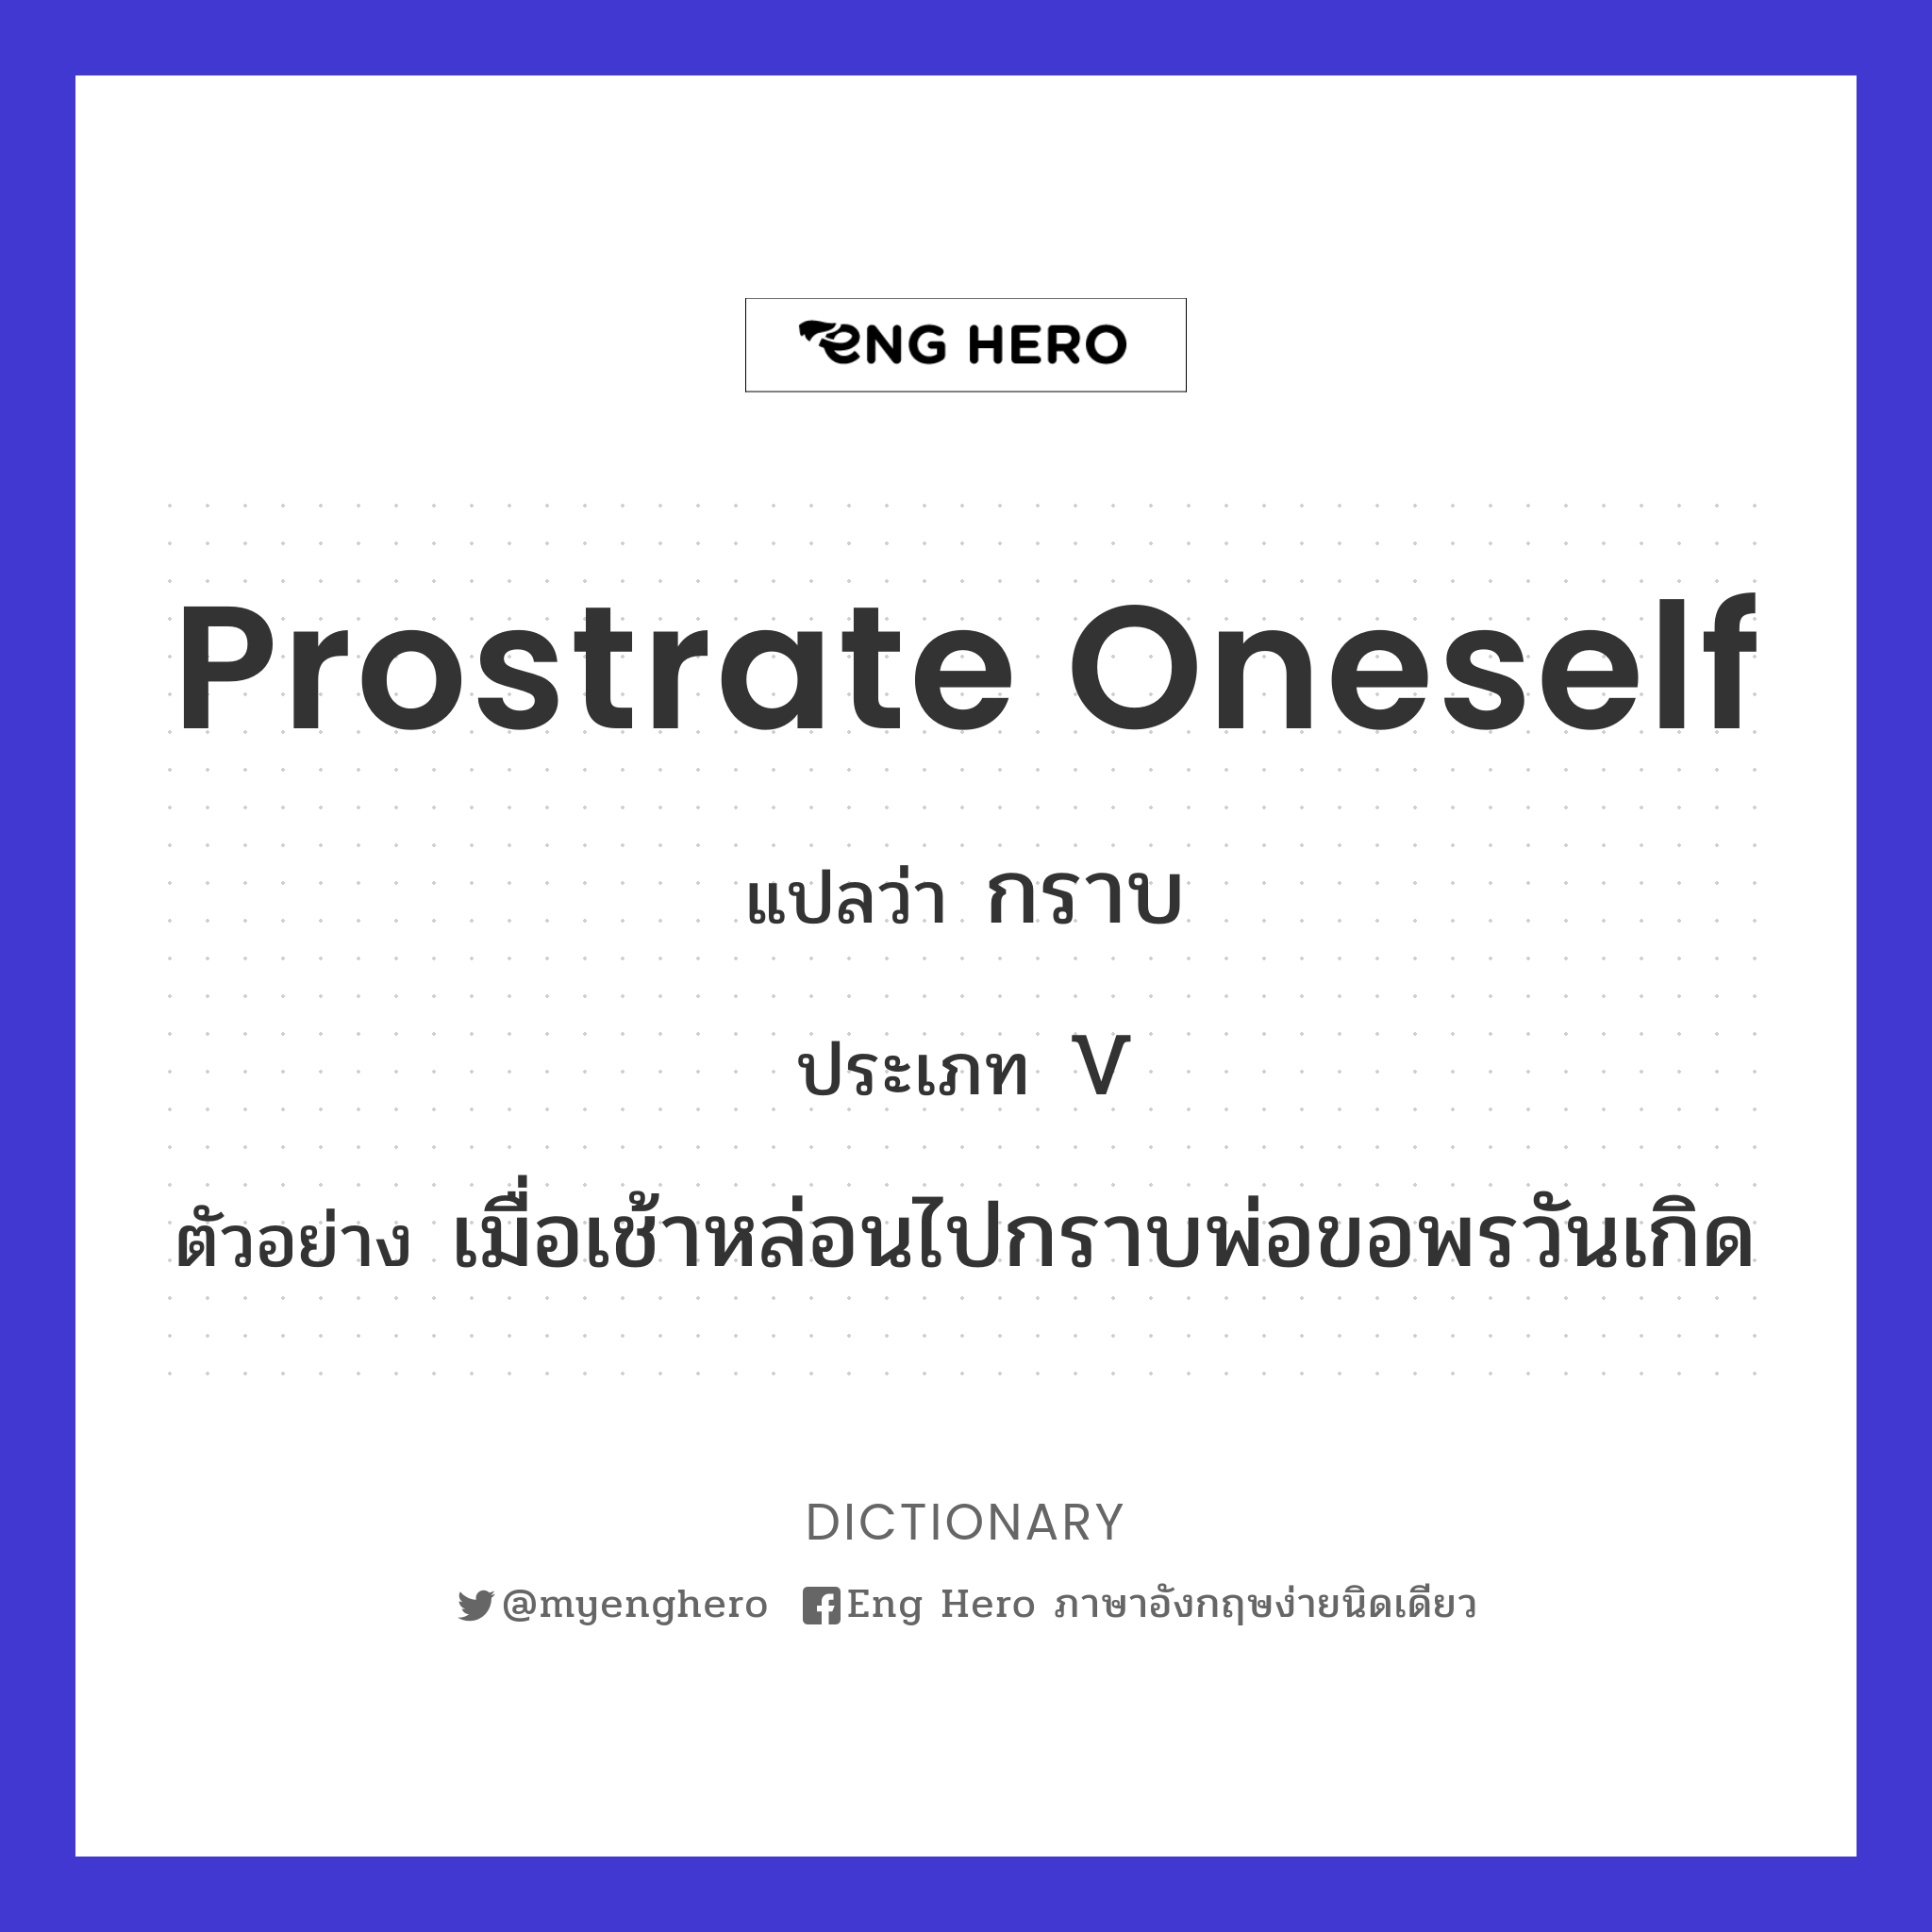 prostrate oneself